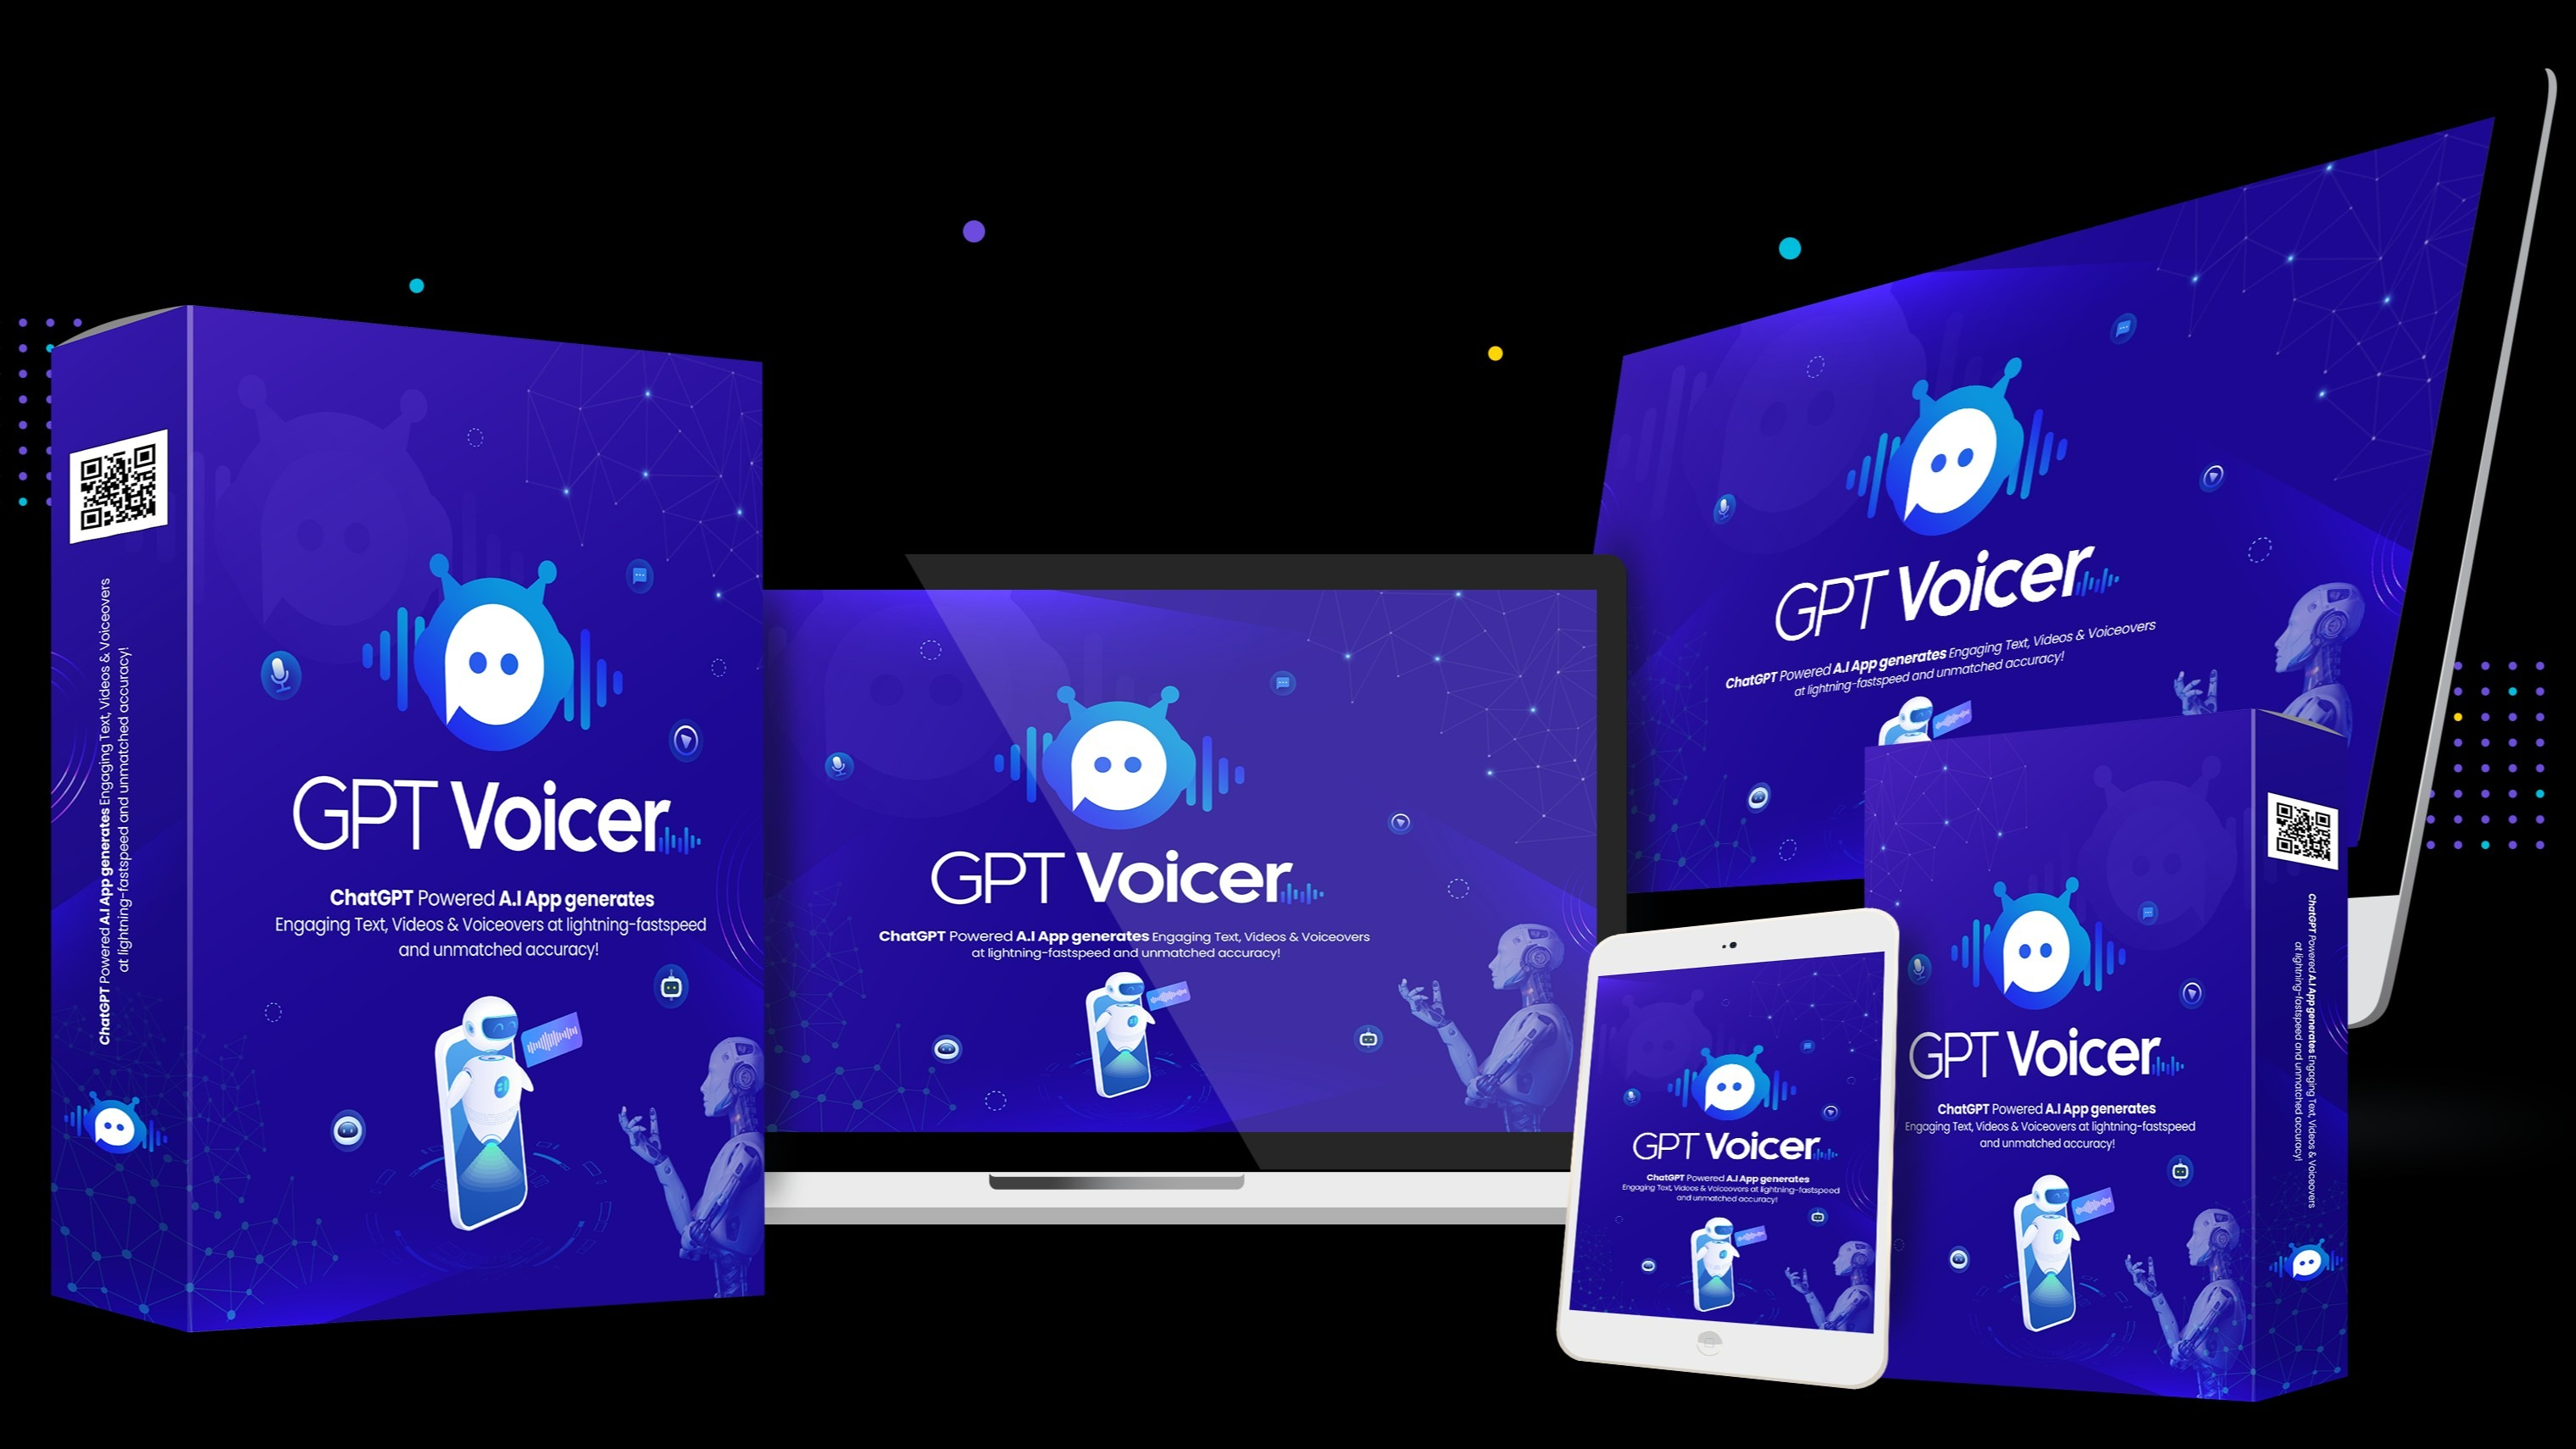 How To Make ChatGPT Create Audio Podcasting Content | GPTVoicer By Eric Holmlund